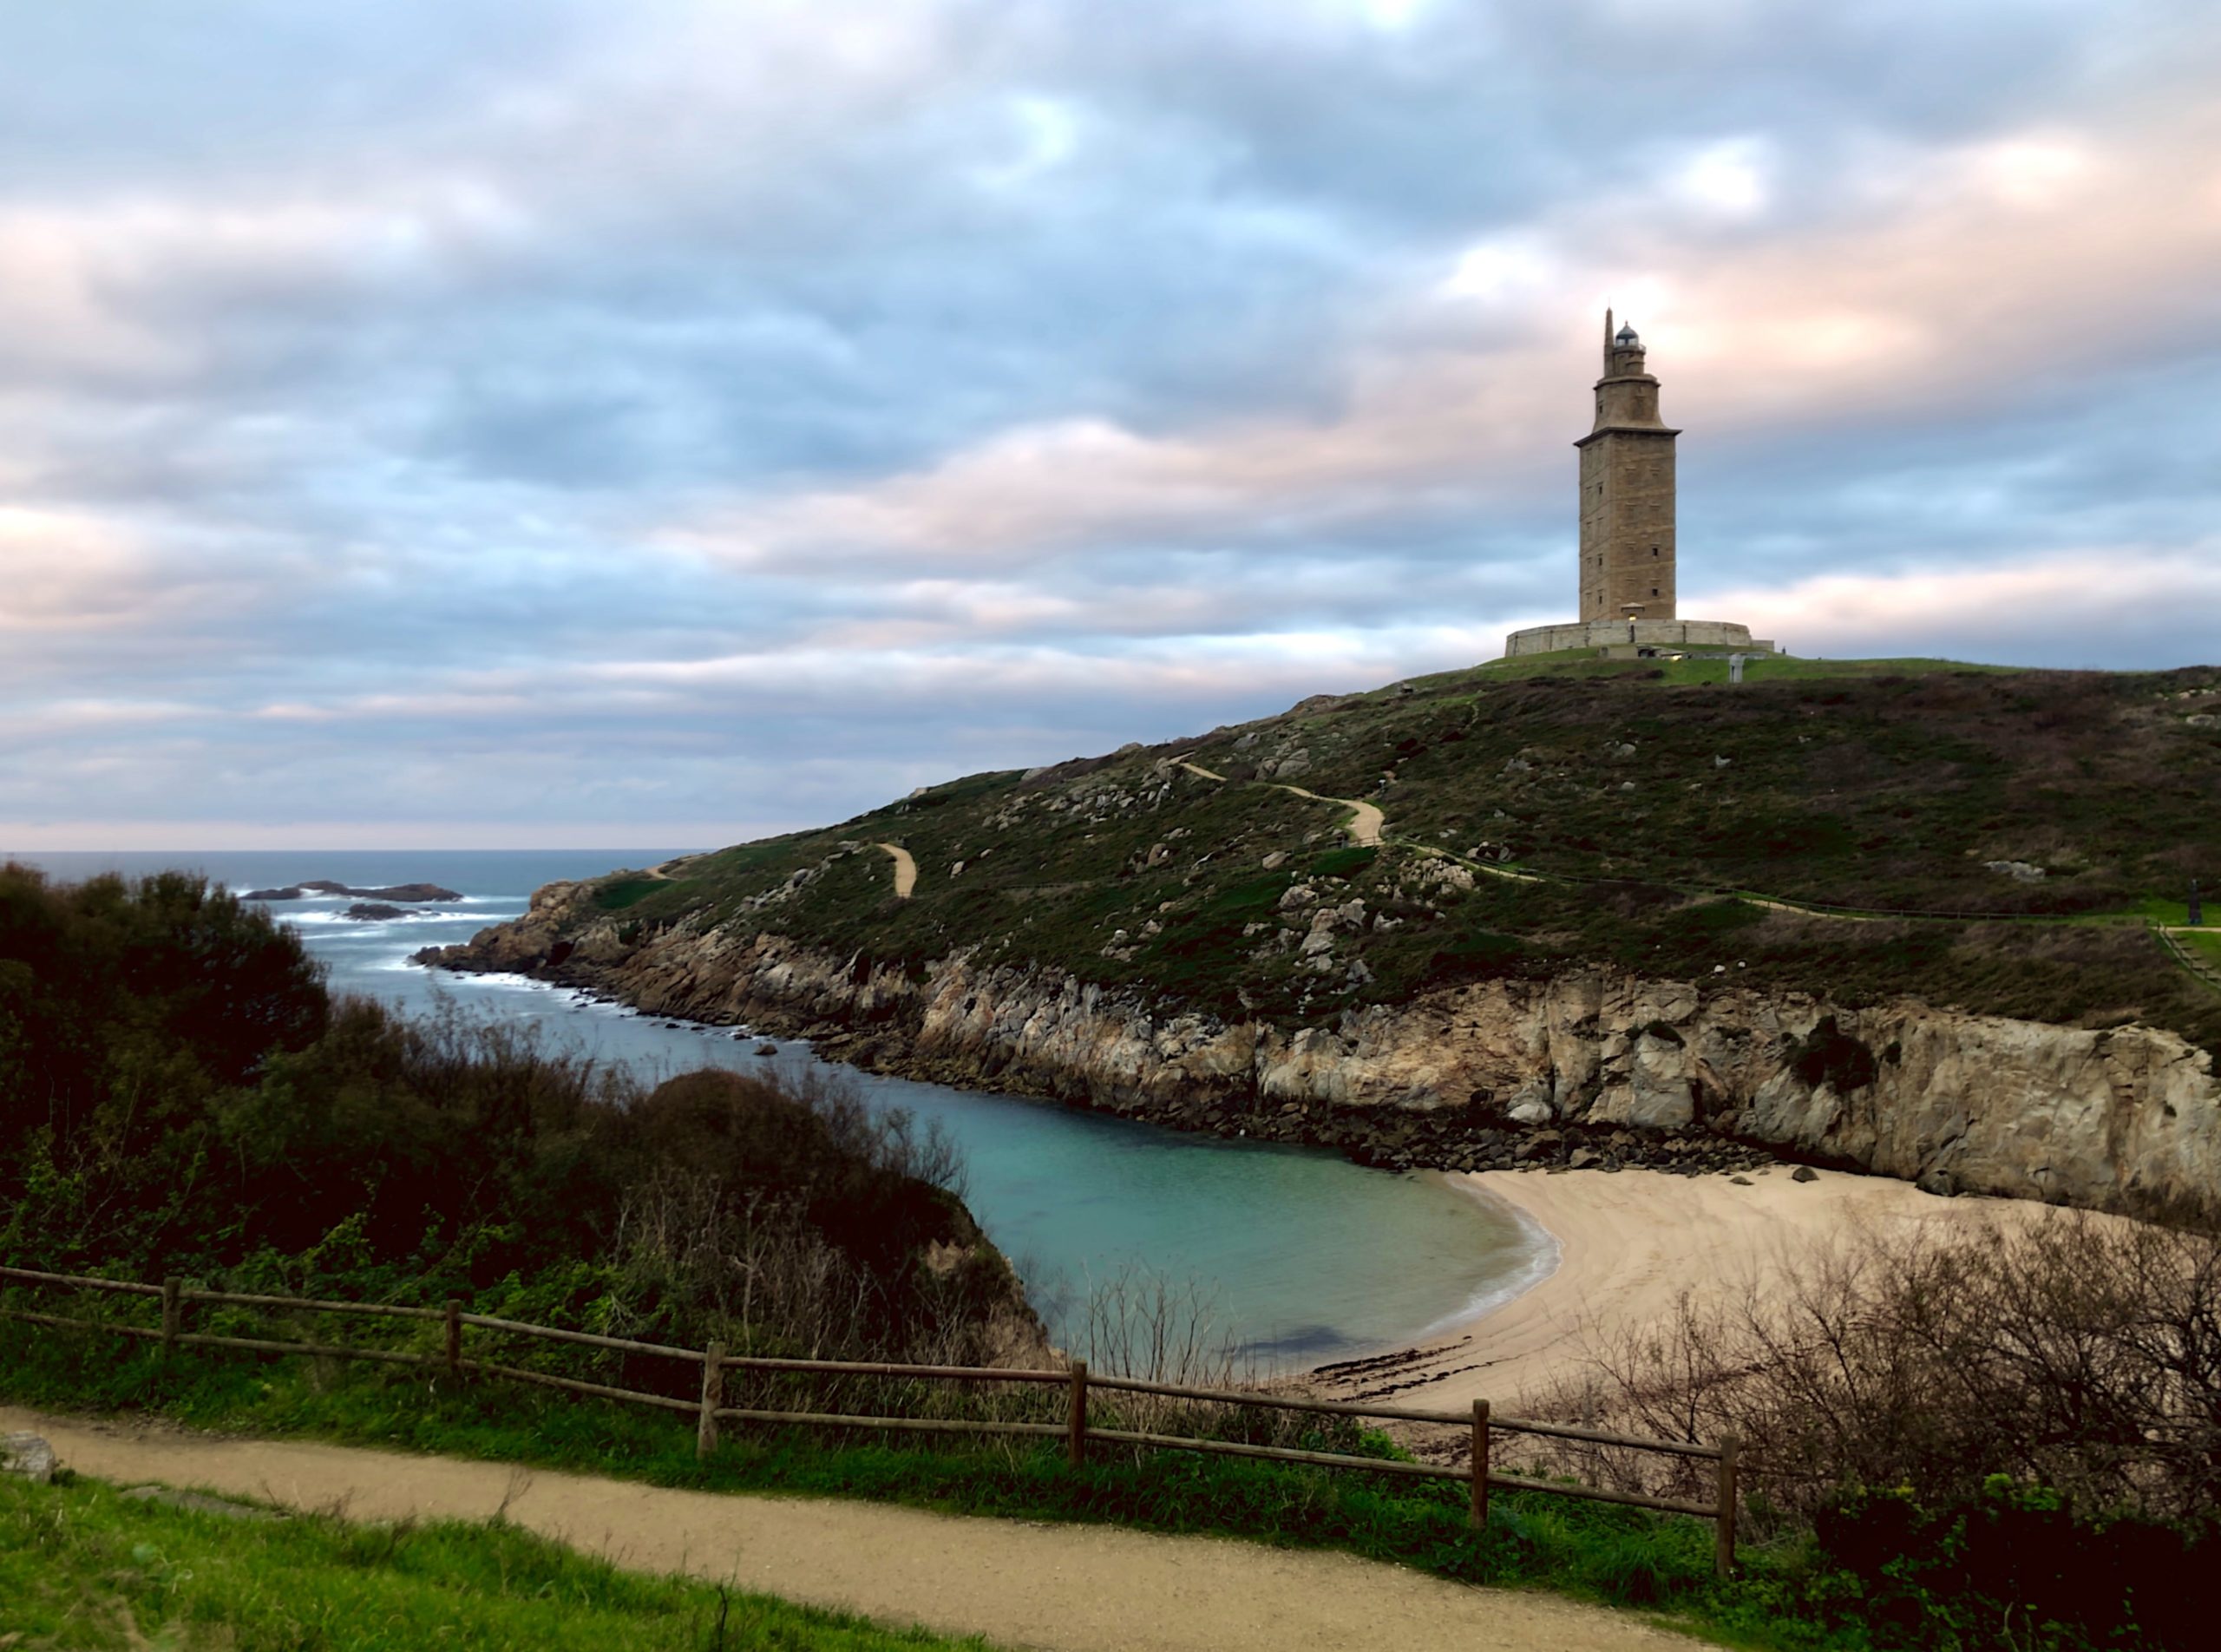 The oldest still functioning lighthouse, Tower of Hercules, atop a hill by the ocean in A Coruña, Galicia, Spain.